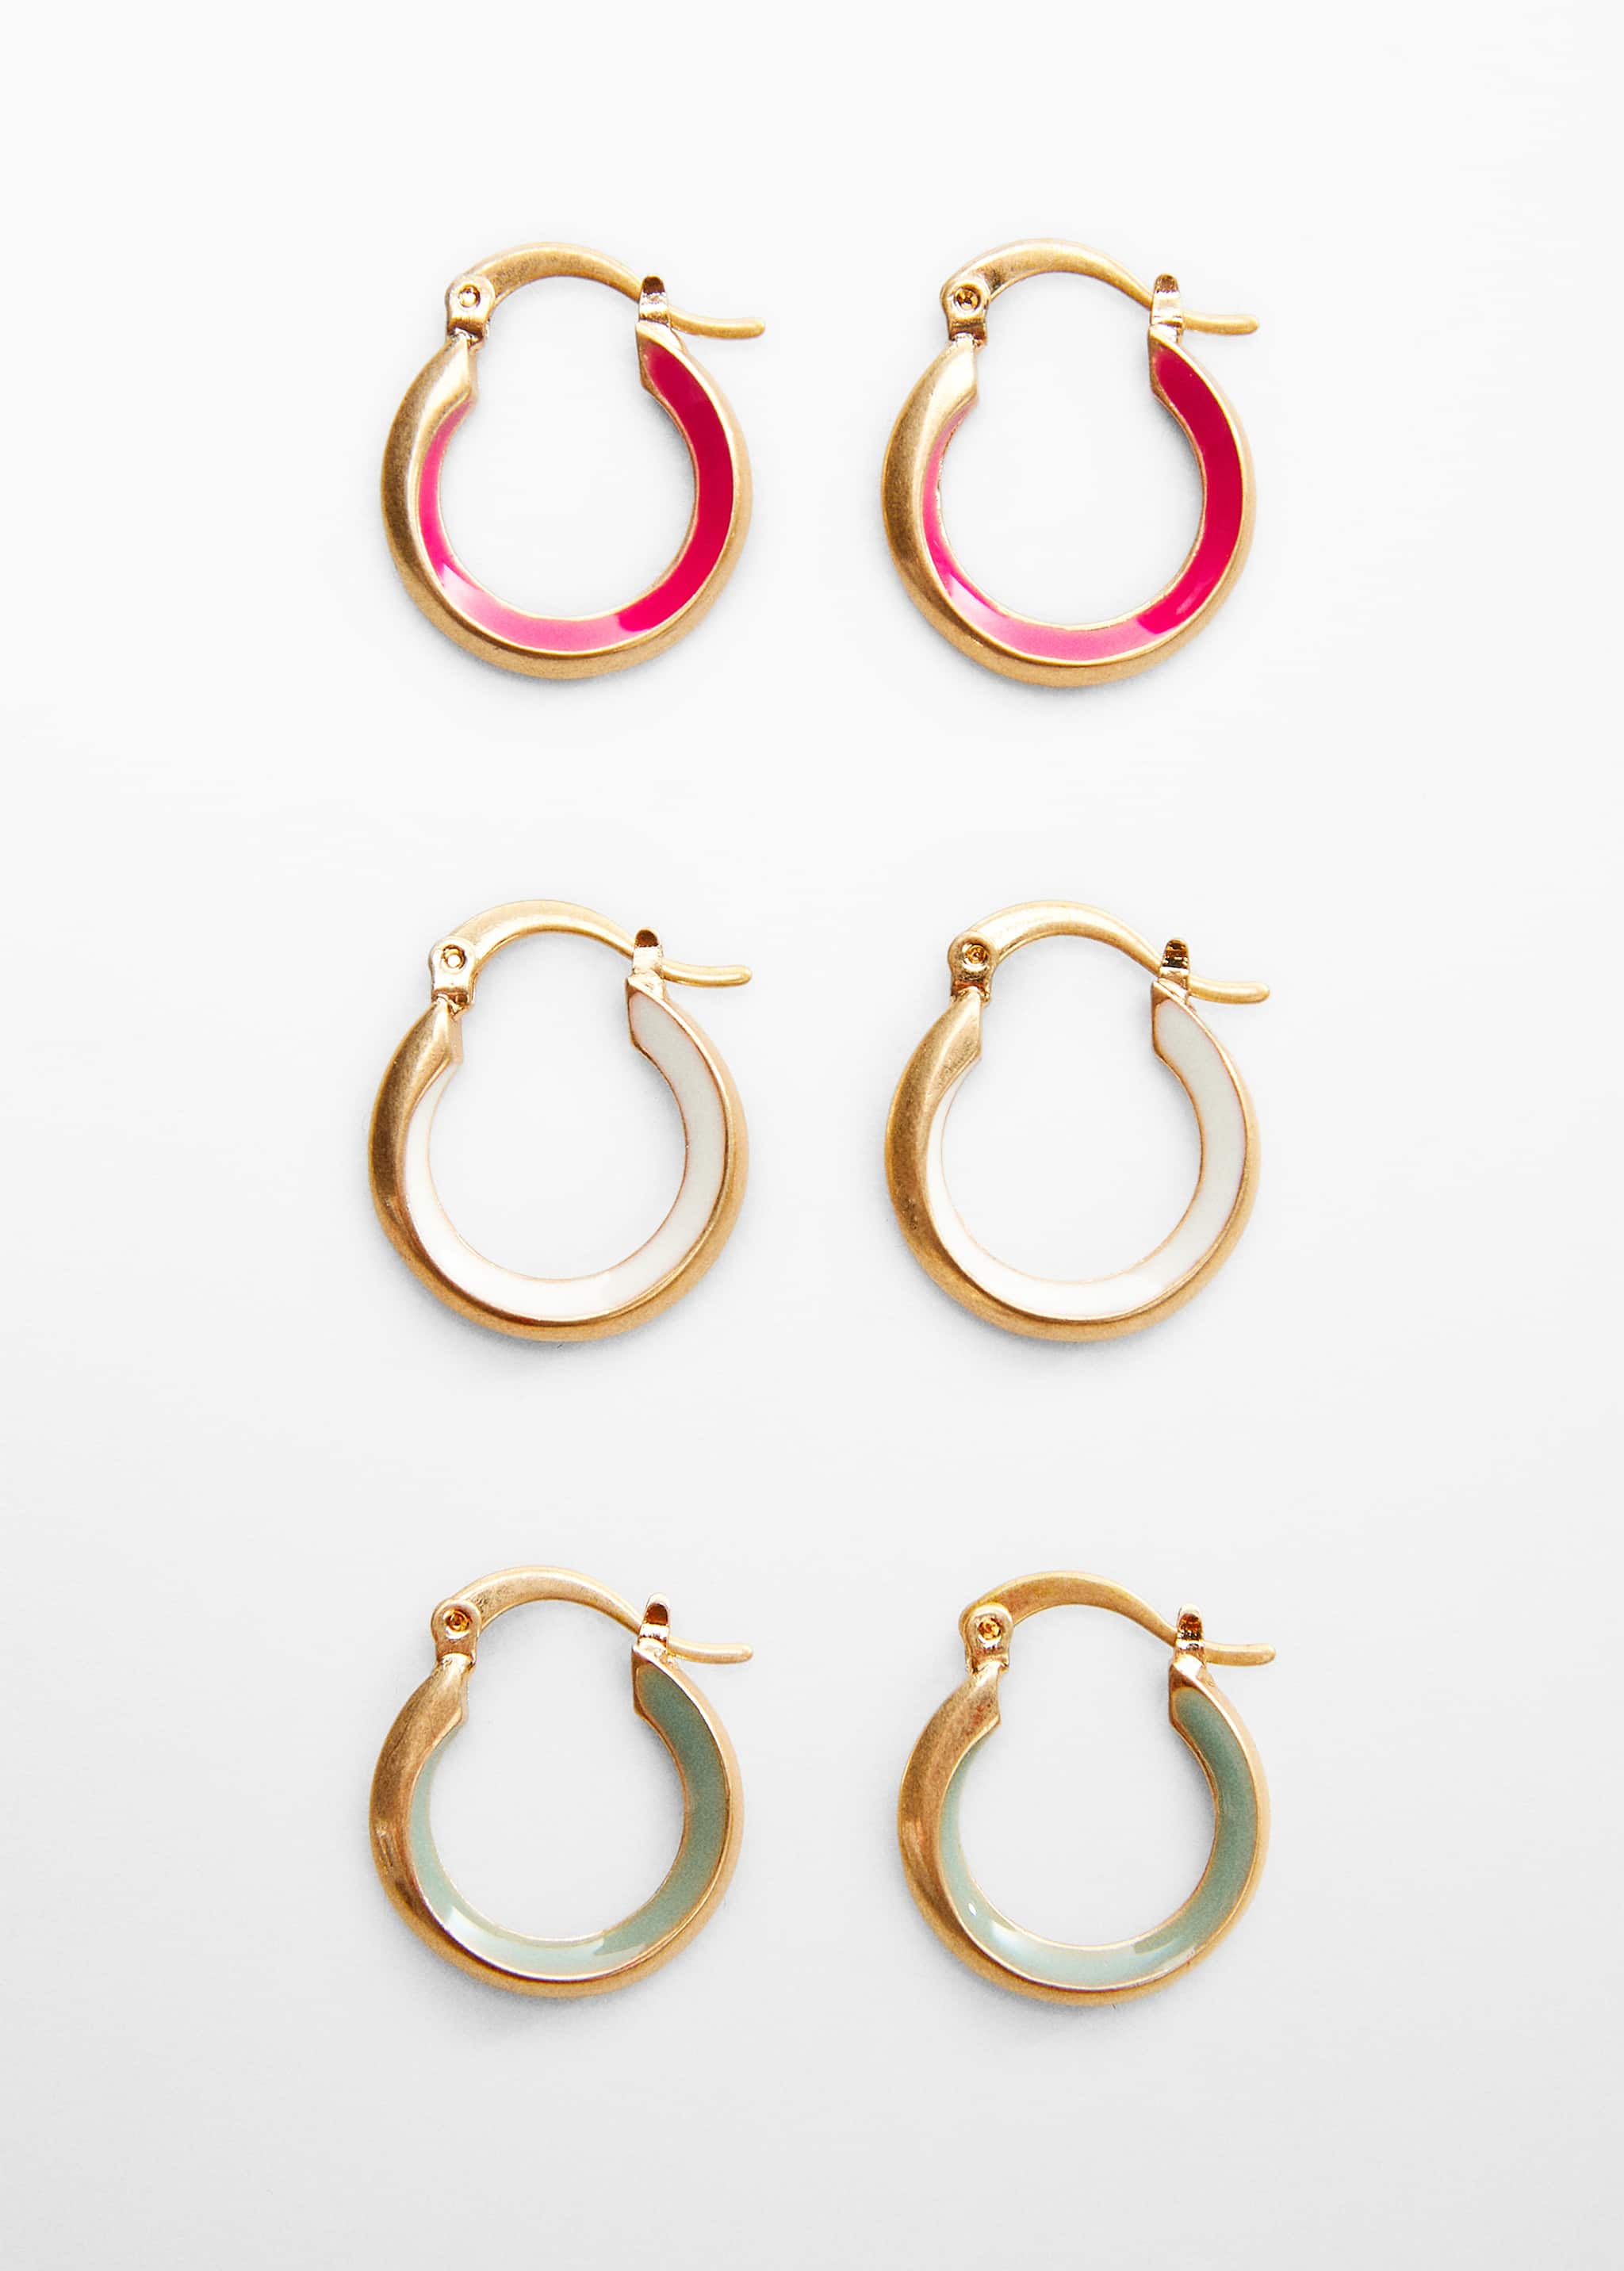 Pack of 3 hoop earrings - Article without model